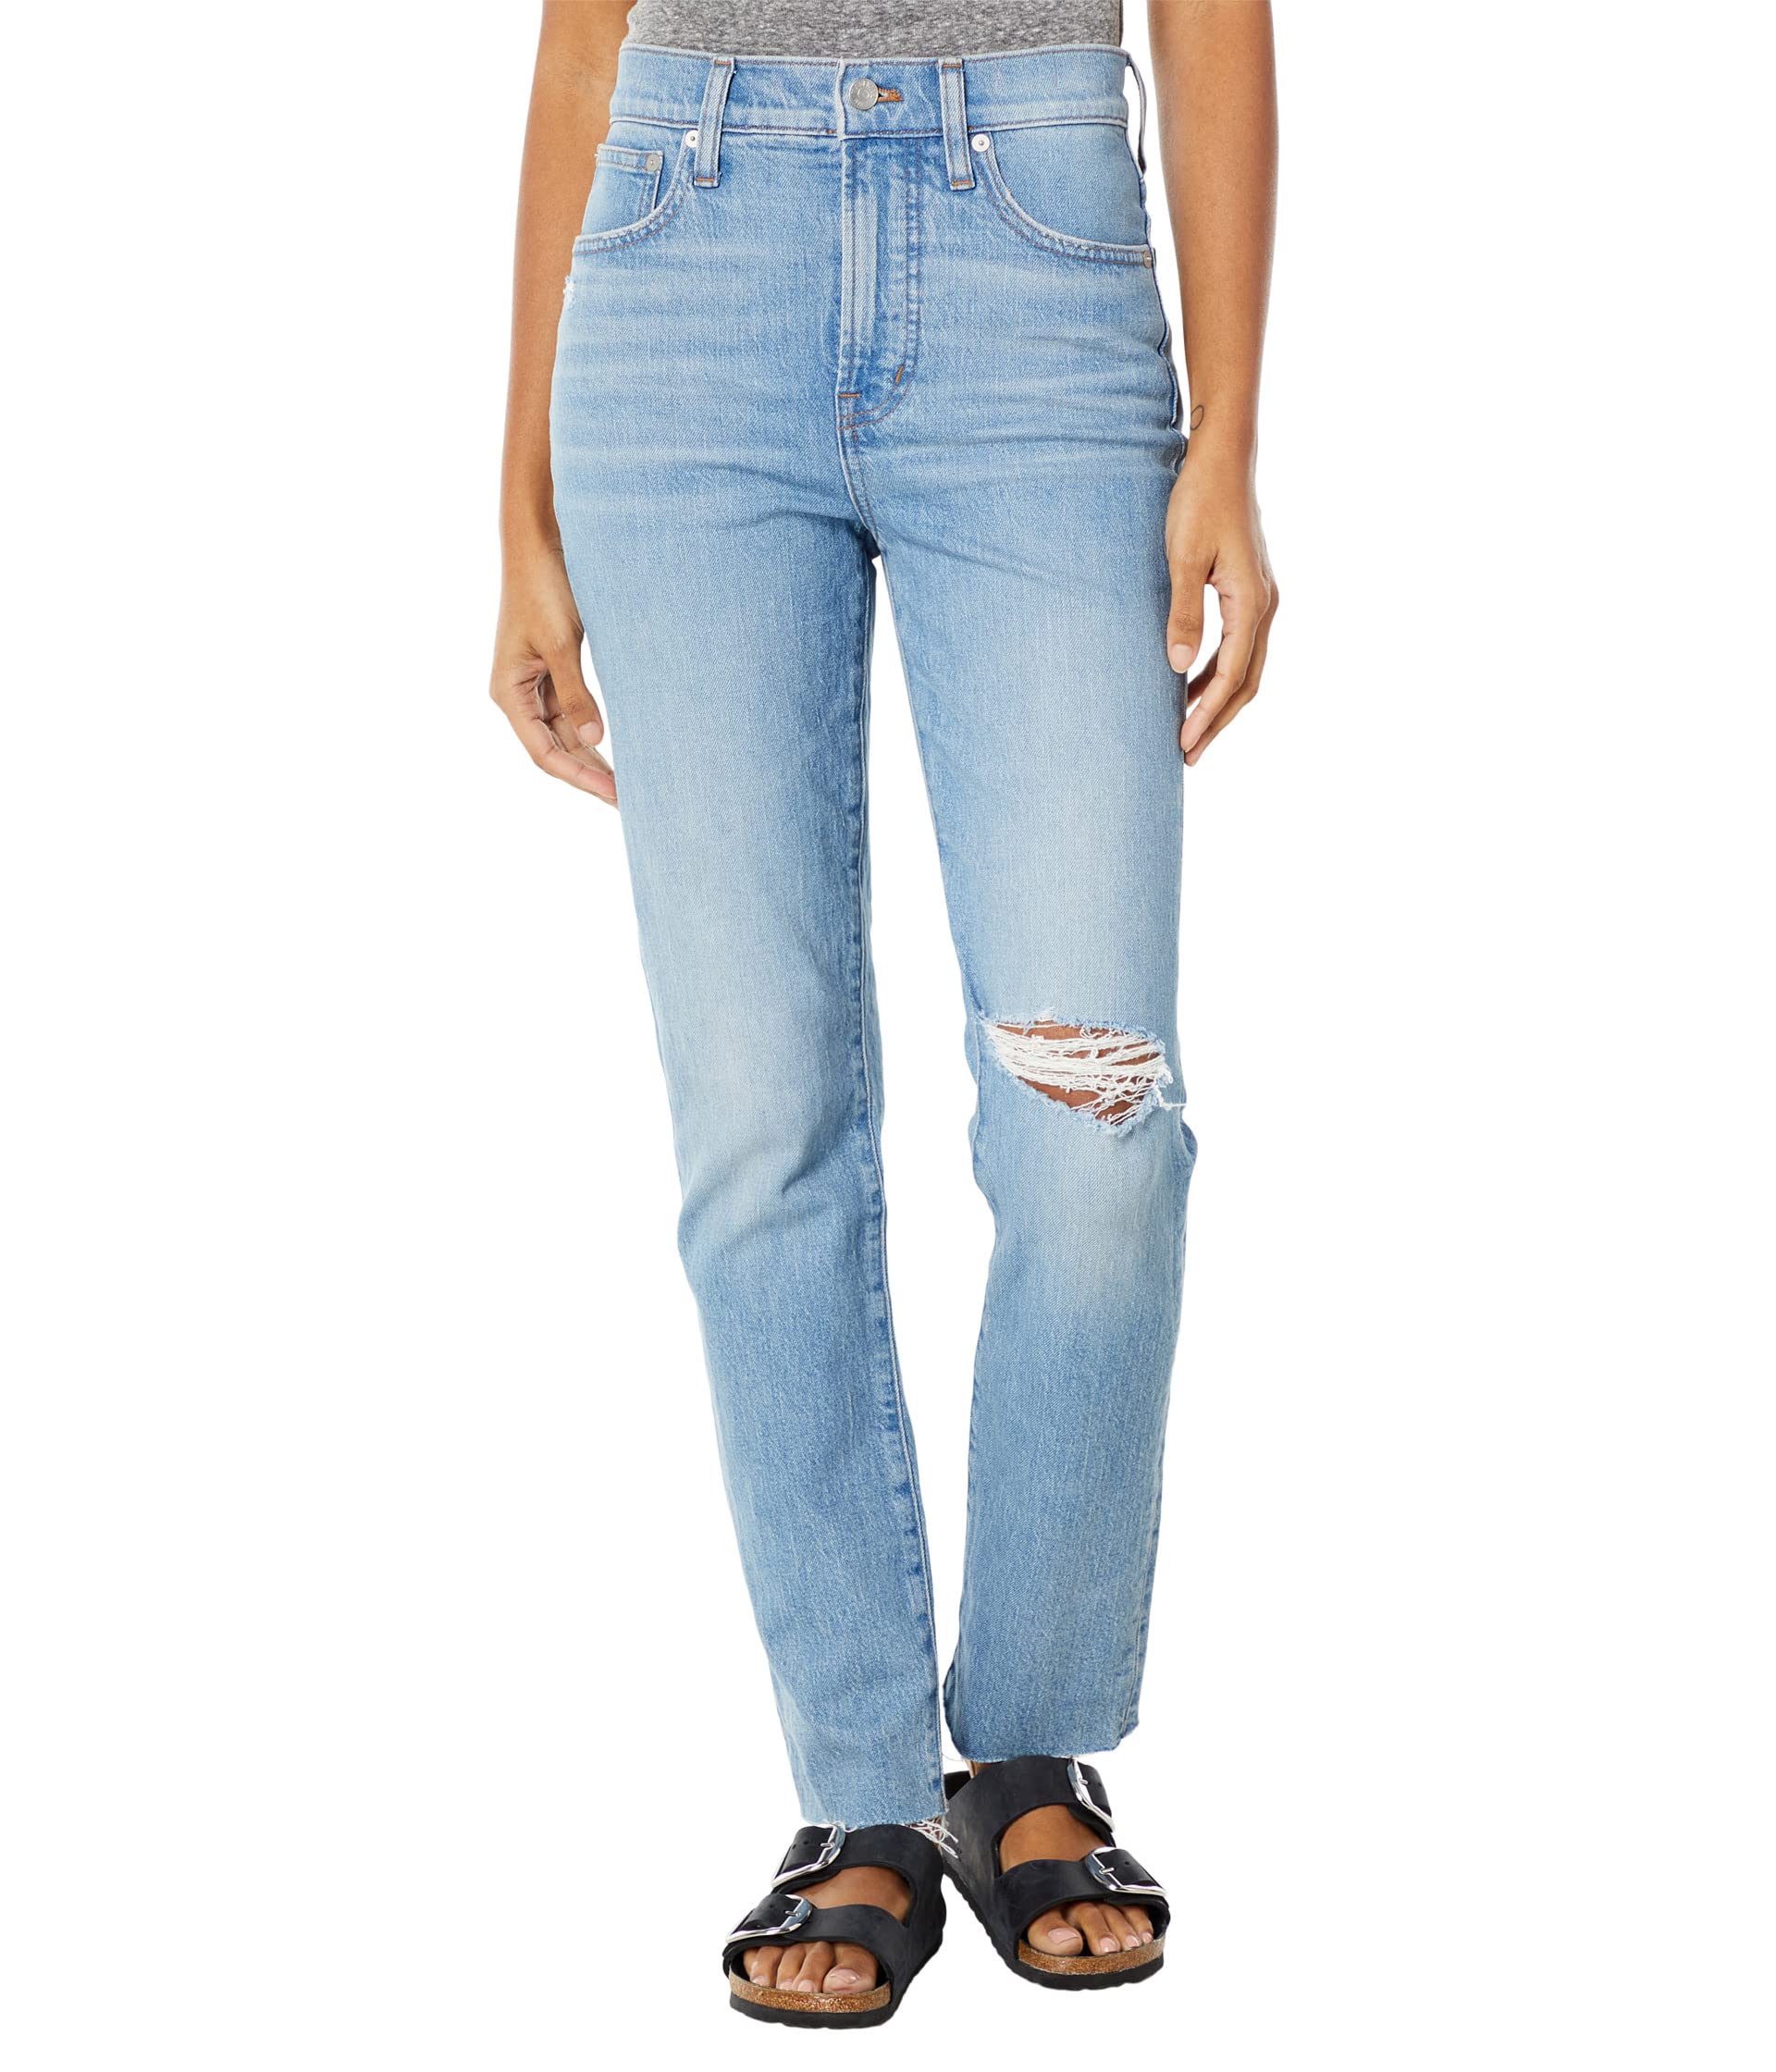 Джинсы Madewell, The Tall Perfect Vintage Jean in Coney Wash: Destroyed Edition